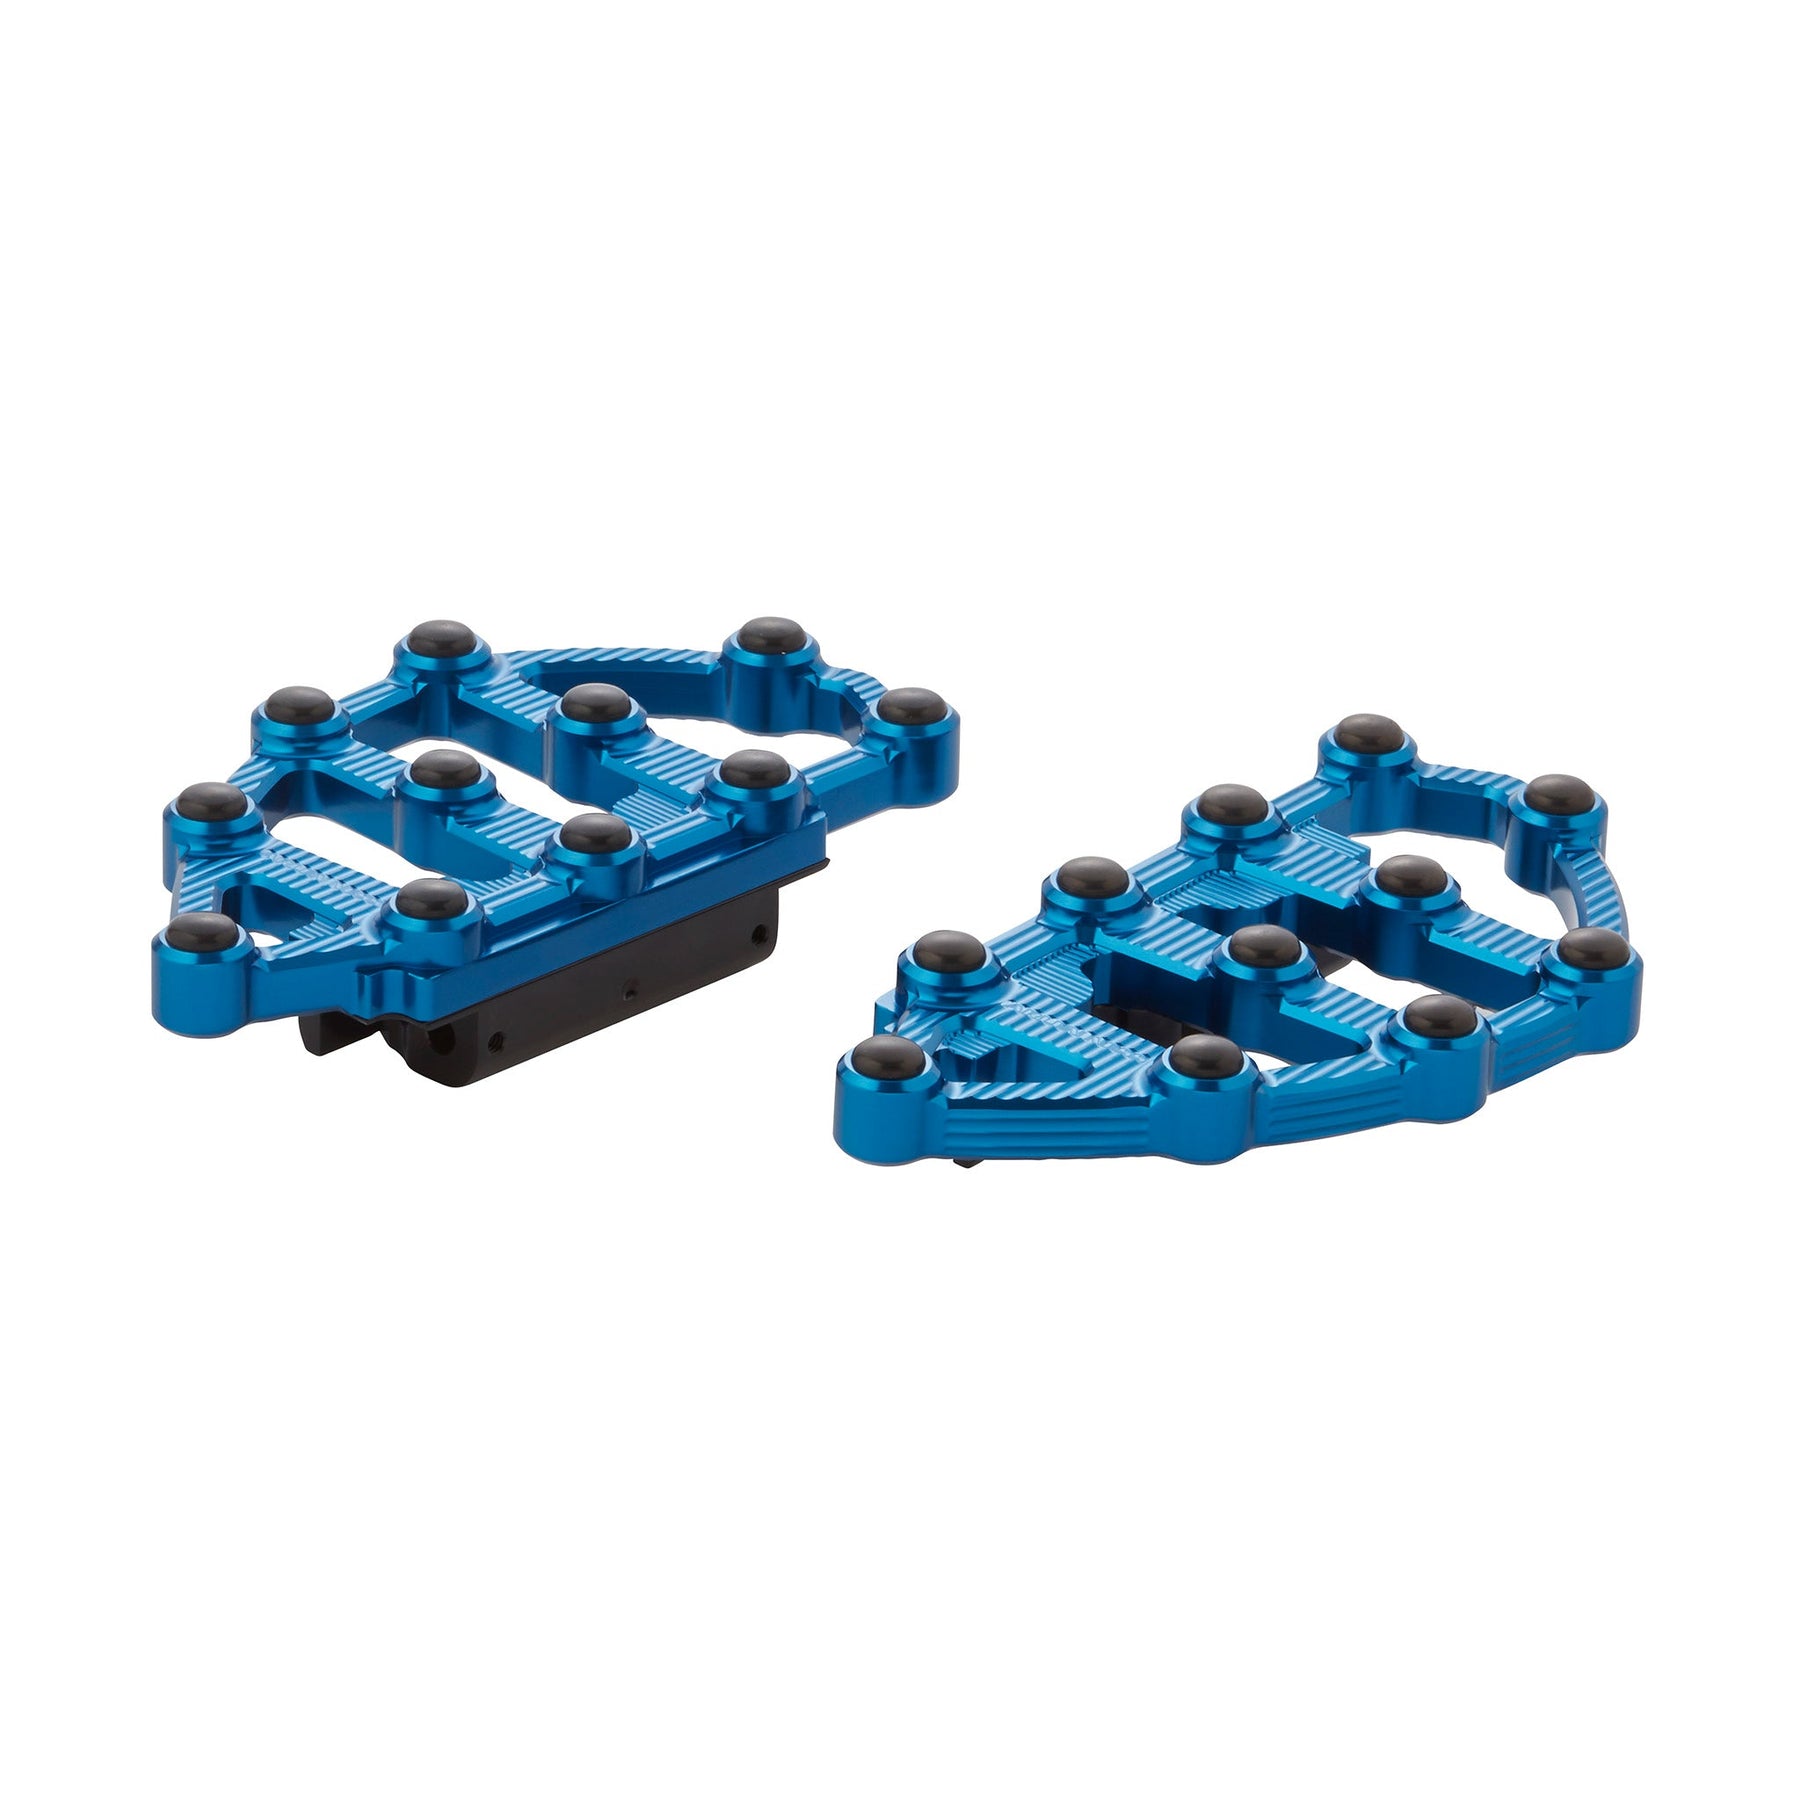 Copy of Ness-MX Passenger Floorboards for Indian, Blue